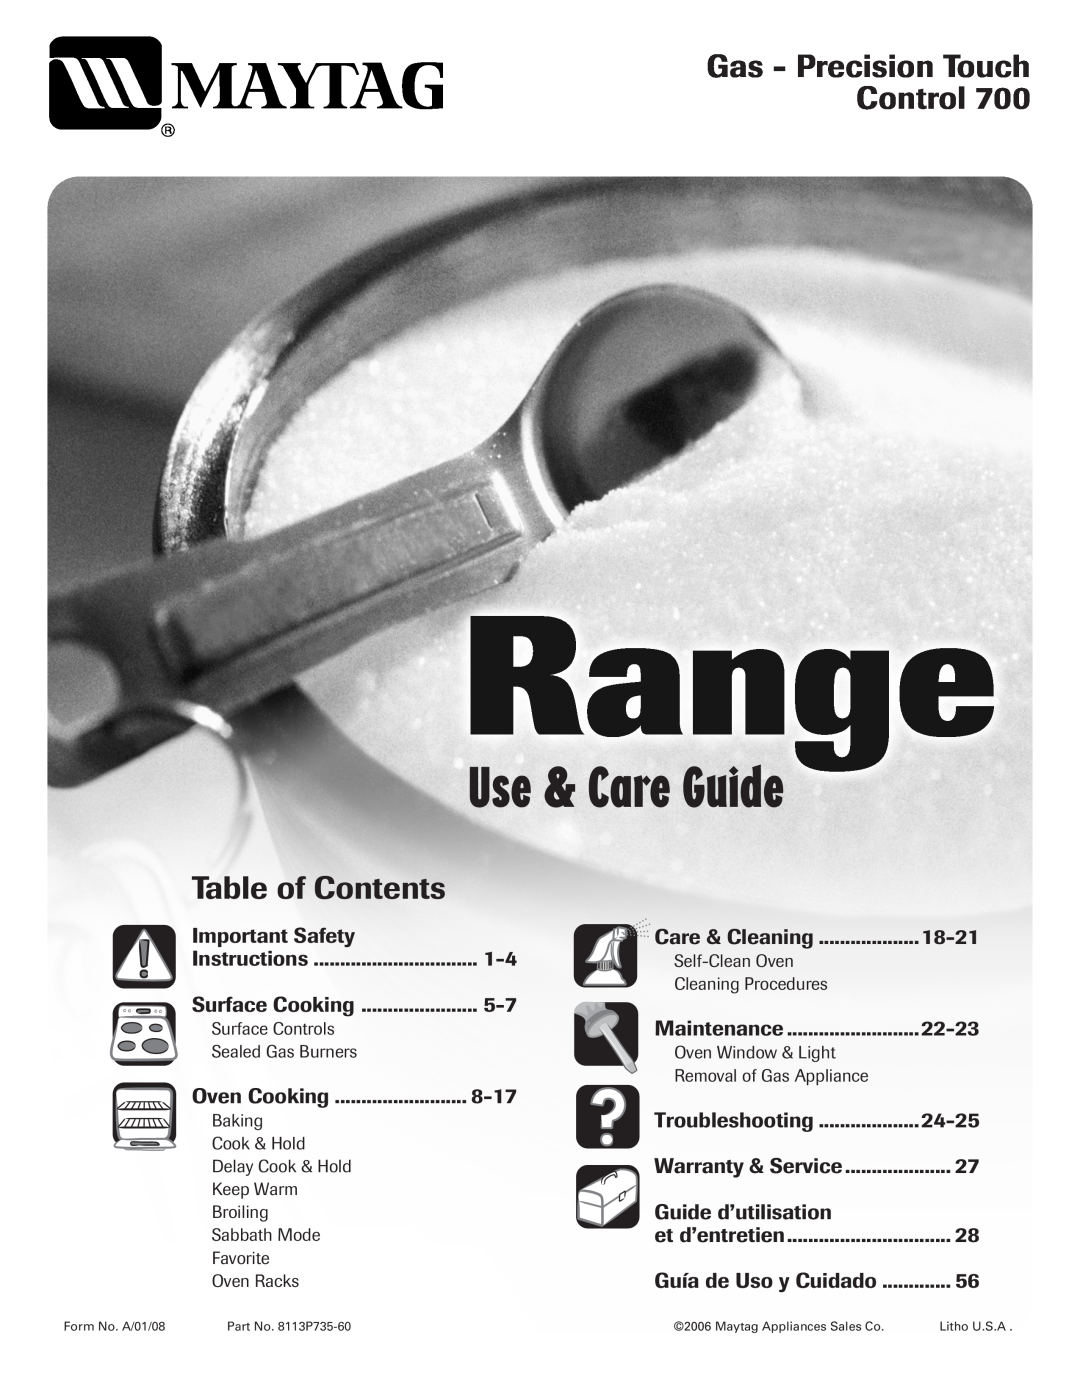 Maytag MGR5775QDW manual Use & Care Guide, Gas - Precision Touch Control, Table of Contents 